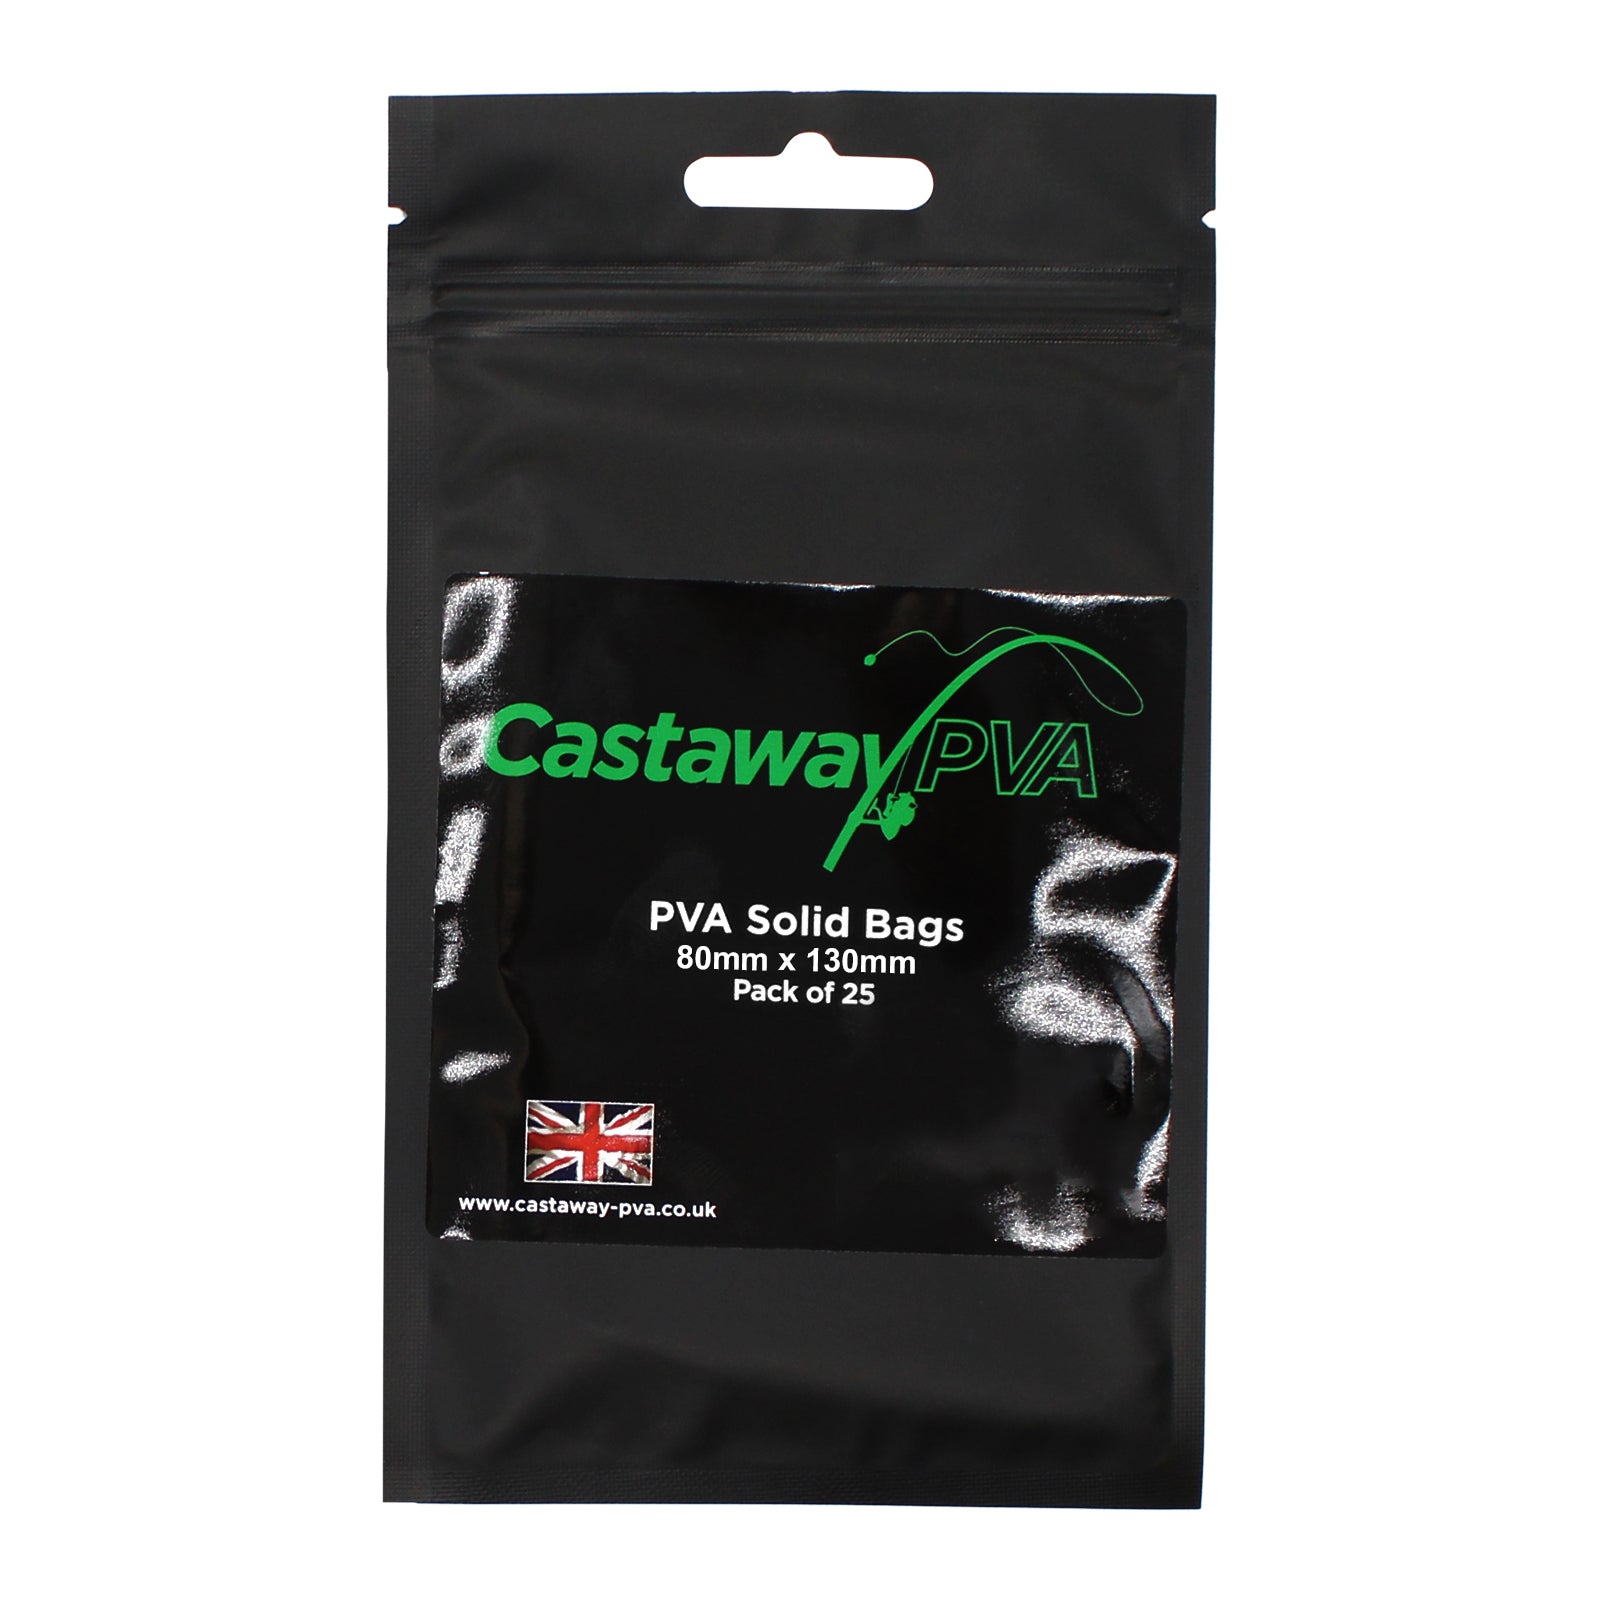 Castaway PVA Solid Bags 80mm x 130mm Pack of 25